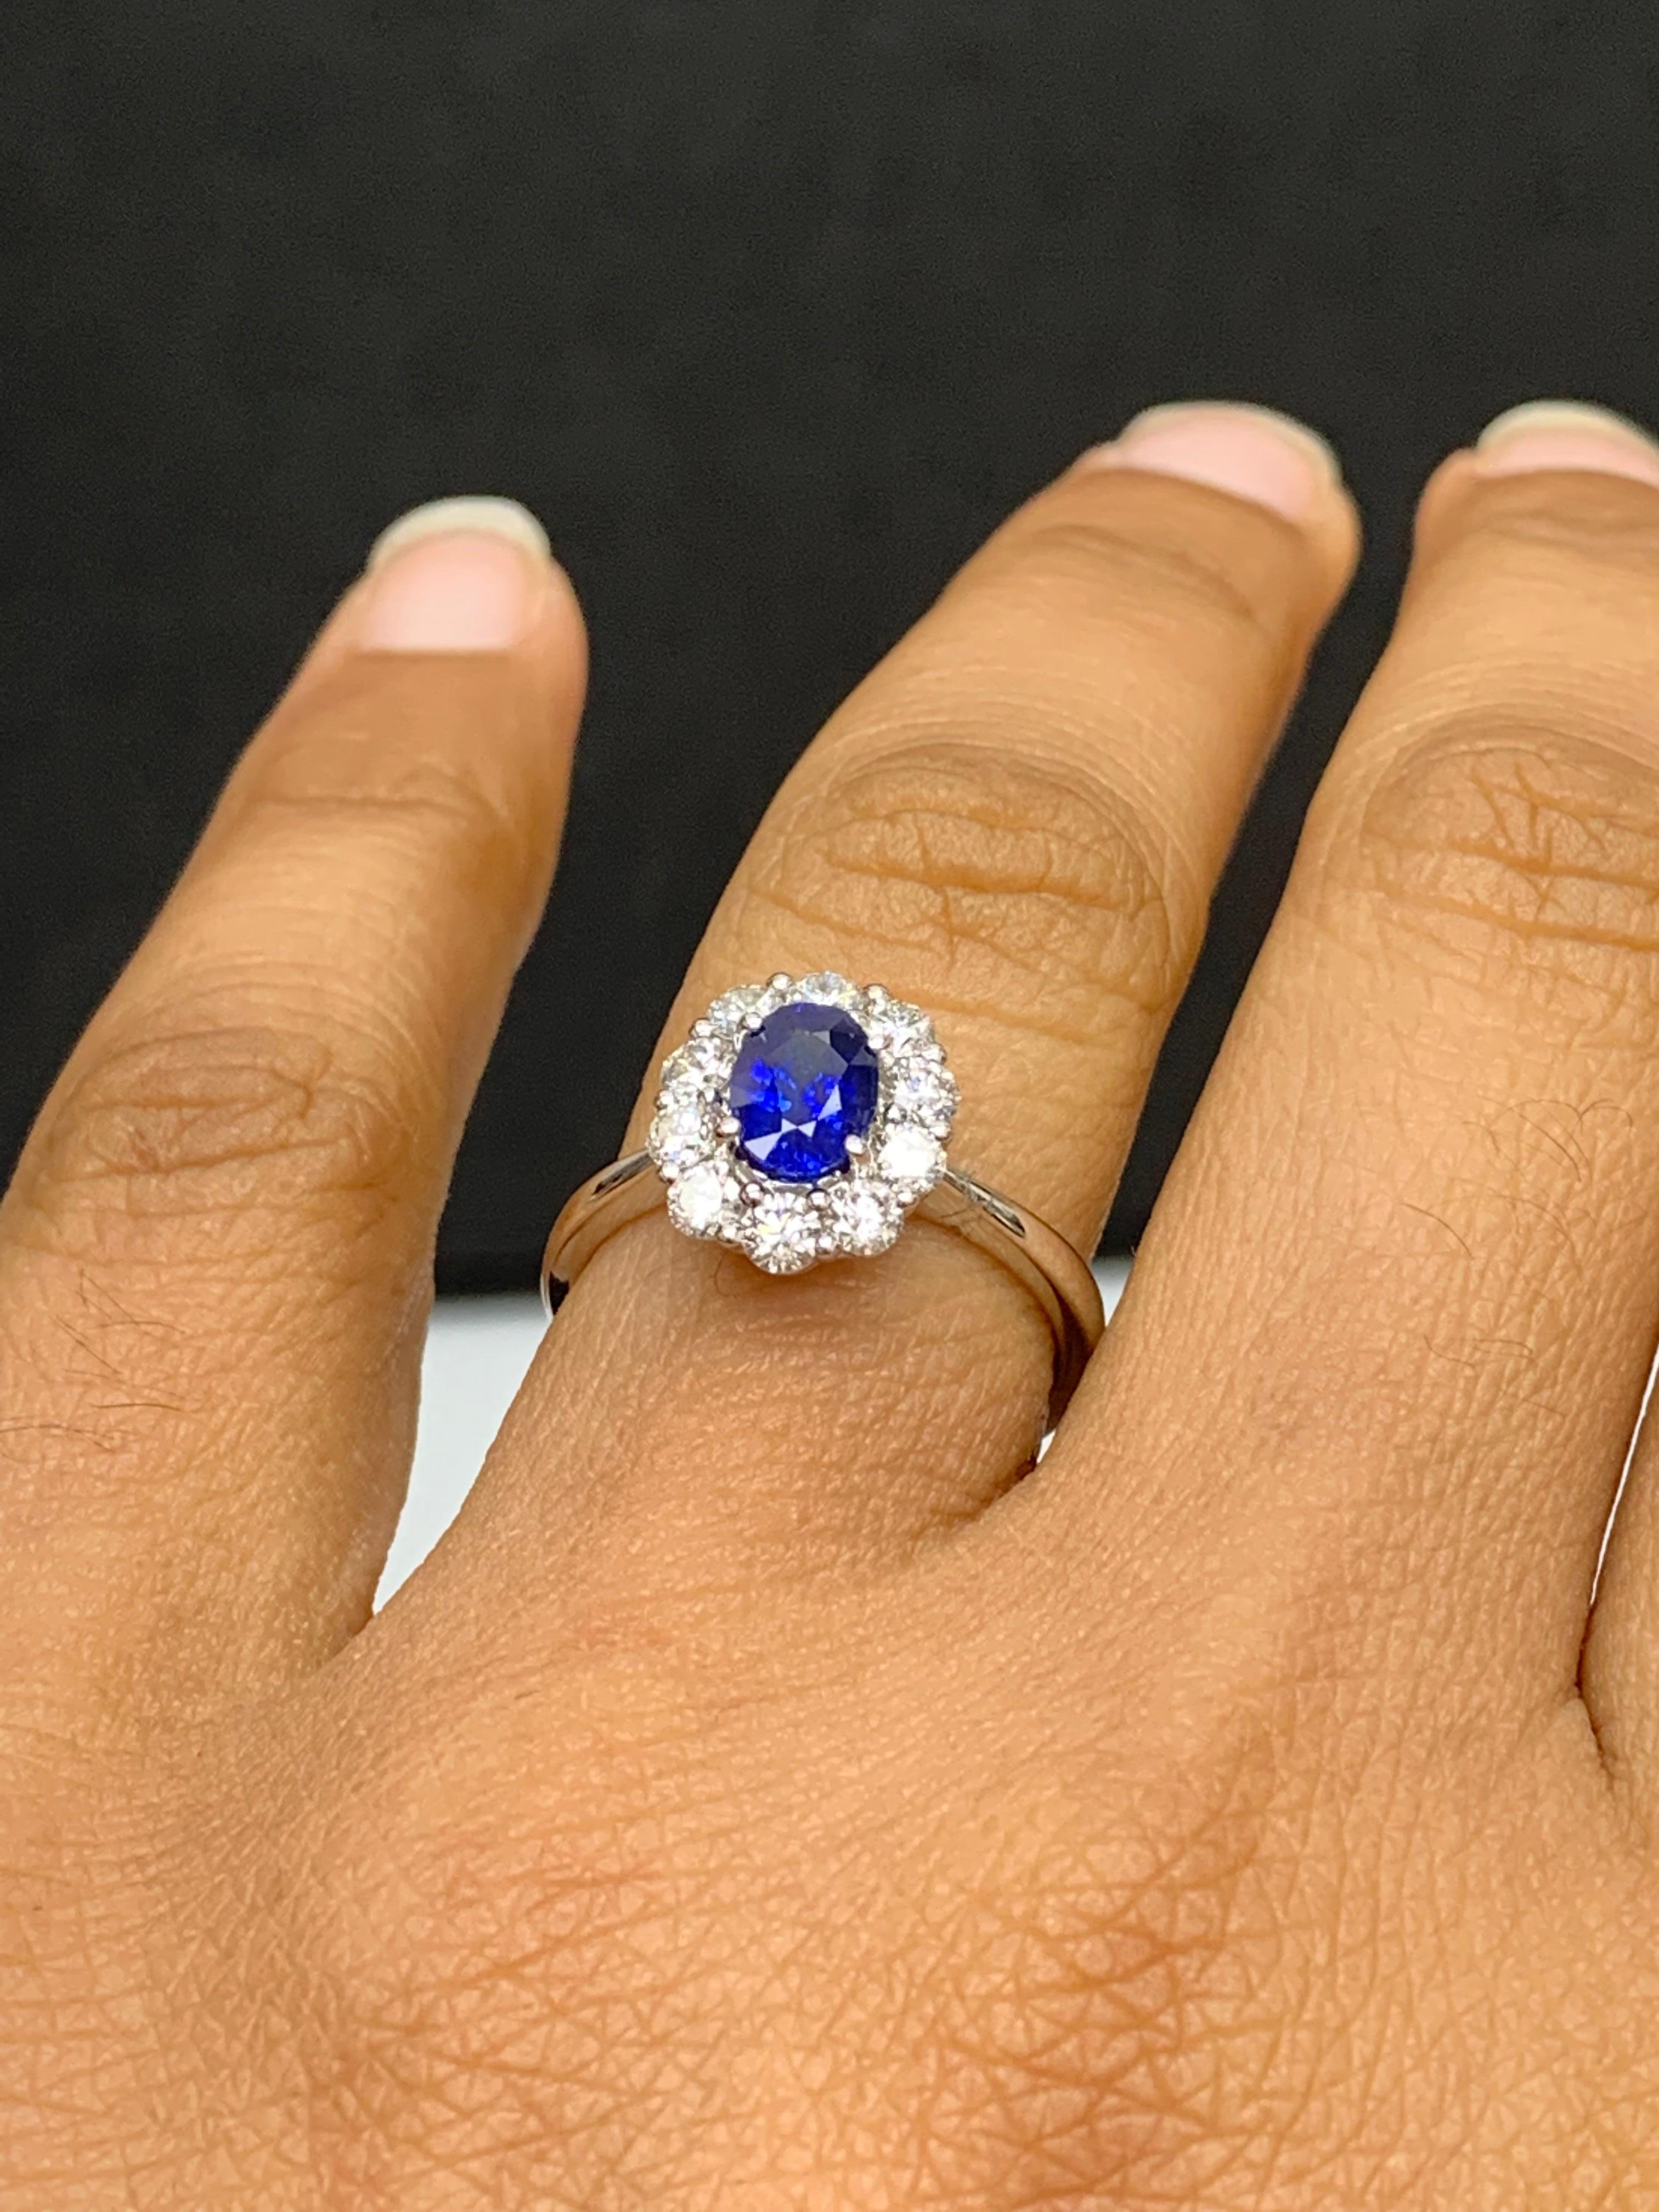 Modern 0.91 Carat Oval Cut Blue Sapphire and Diamond Ring in 18k White Gold For Sale